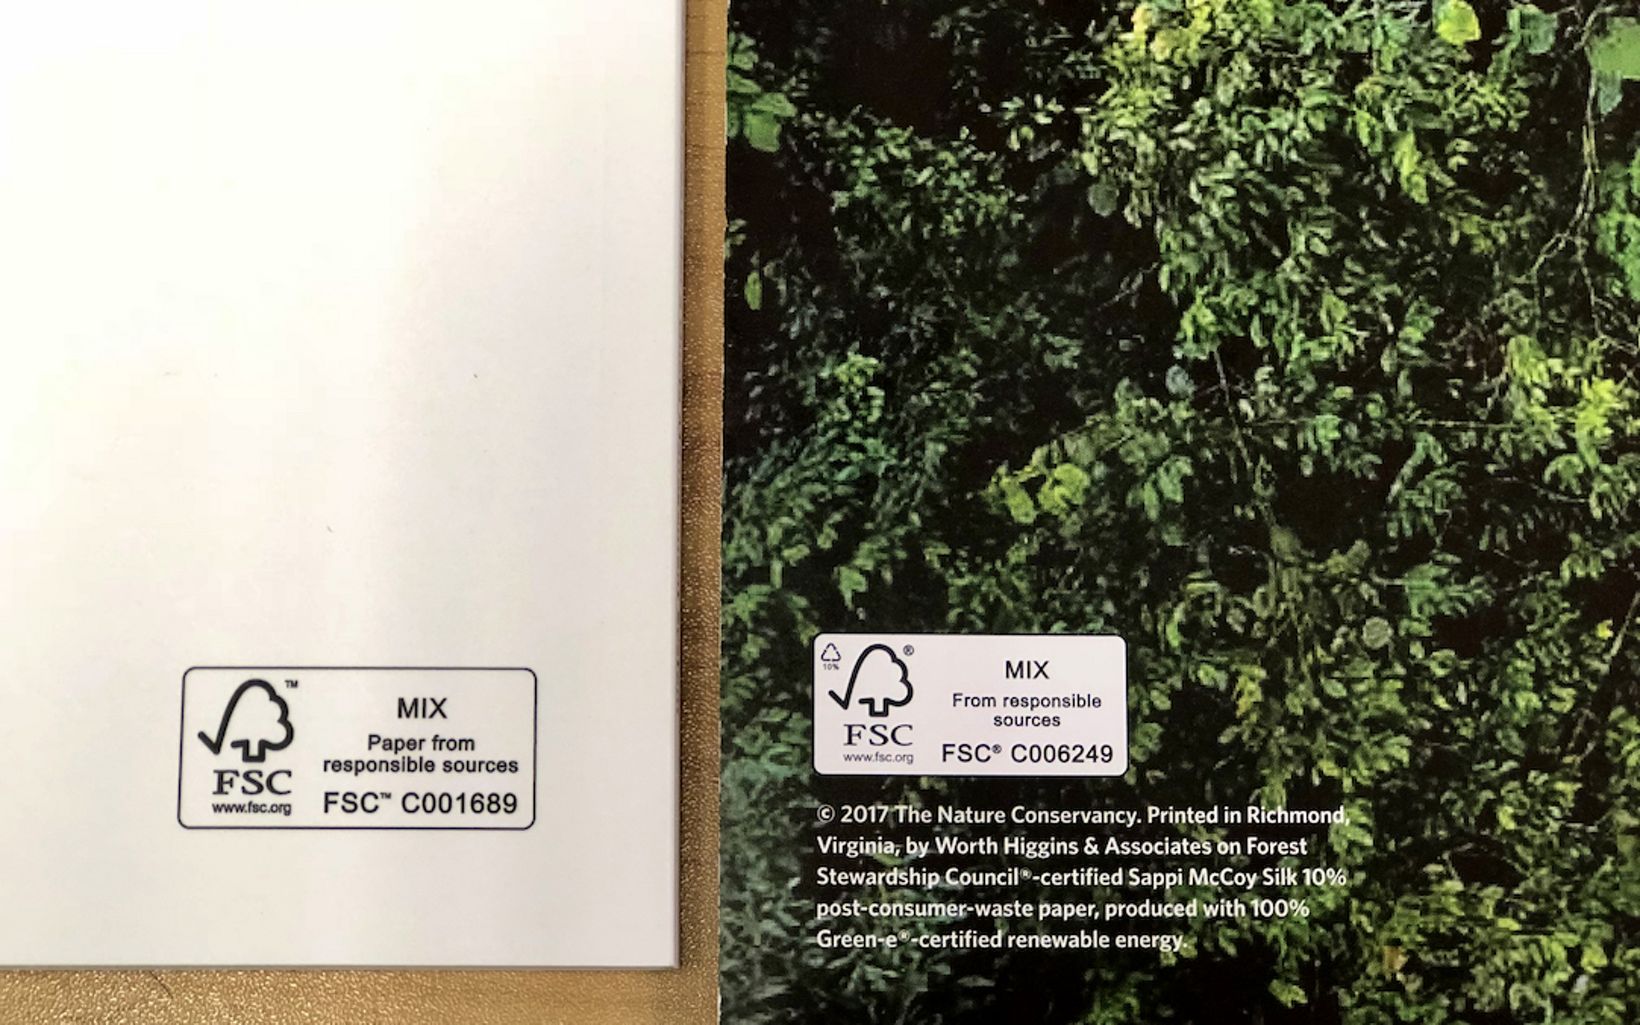 Printed materials with FSC label